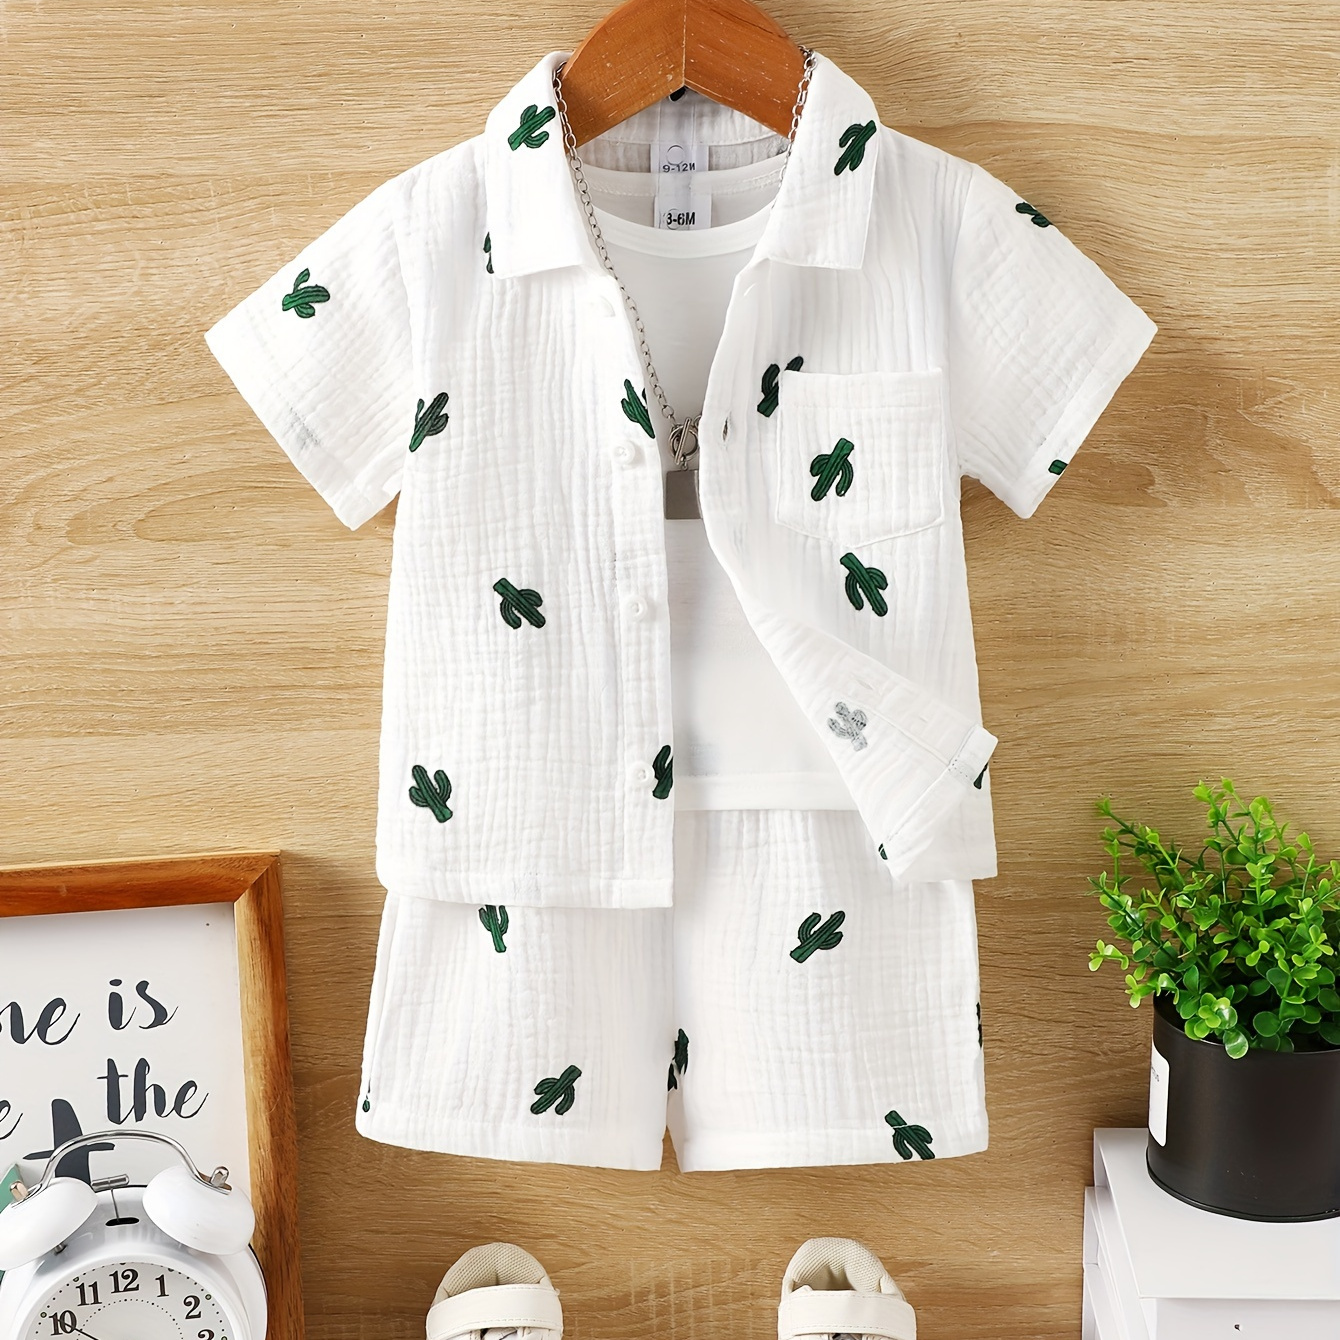 

2pcs Baby Boys' Summer Cactus Print Short Sleeve Collared Shirt & Shorts Set, Casual Toddler Outfit, White And Green, Breathable Cotton Clothing For Infants